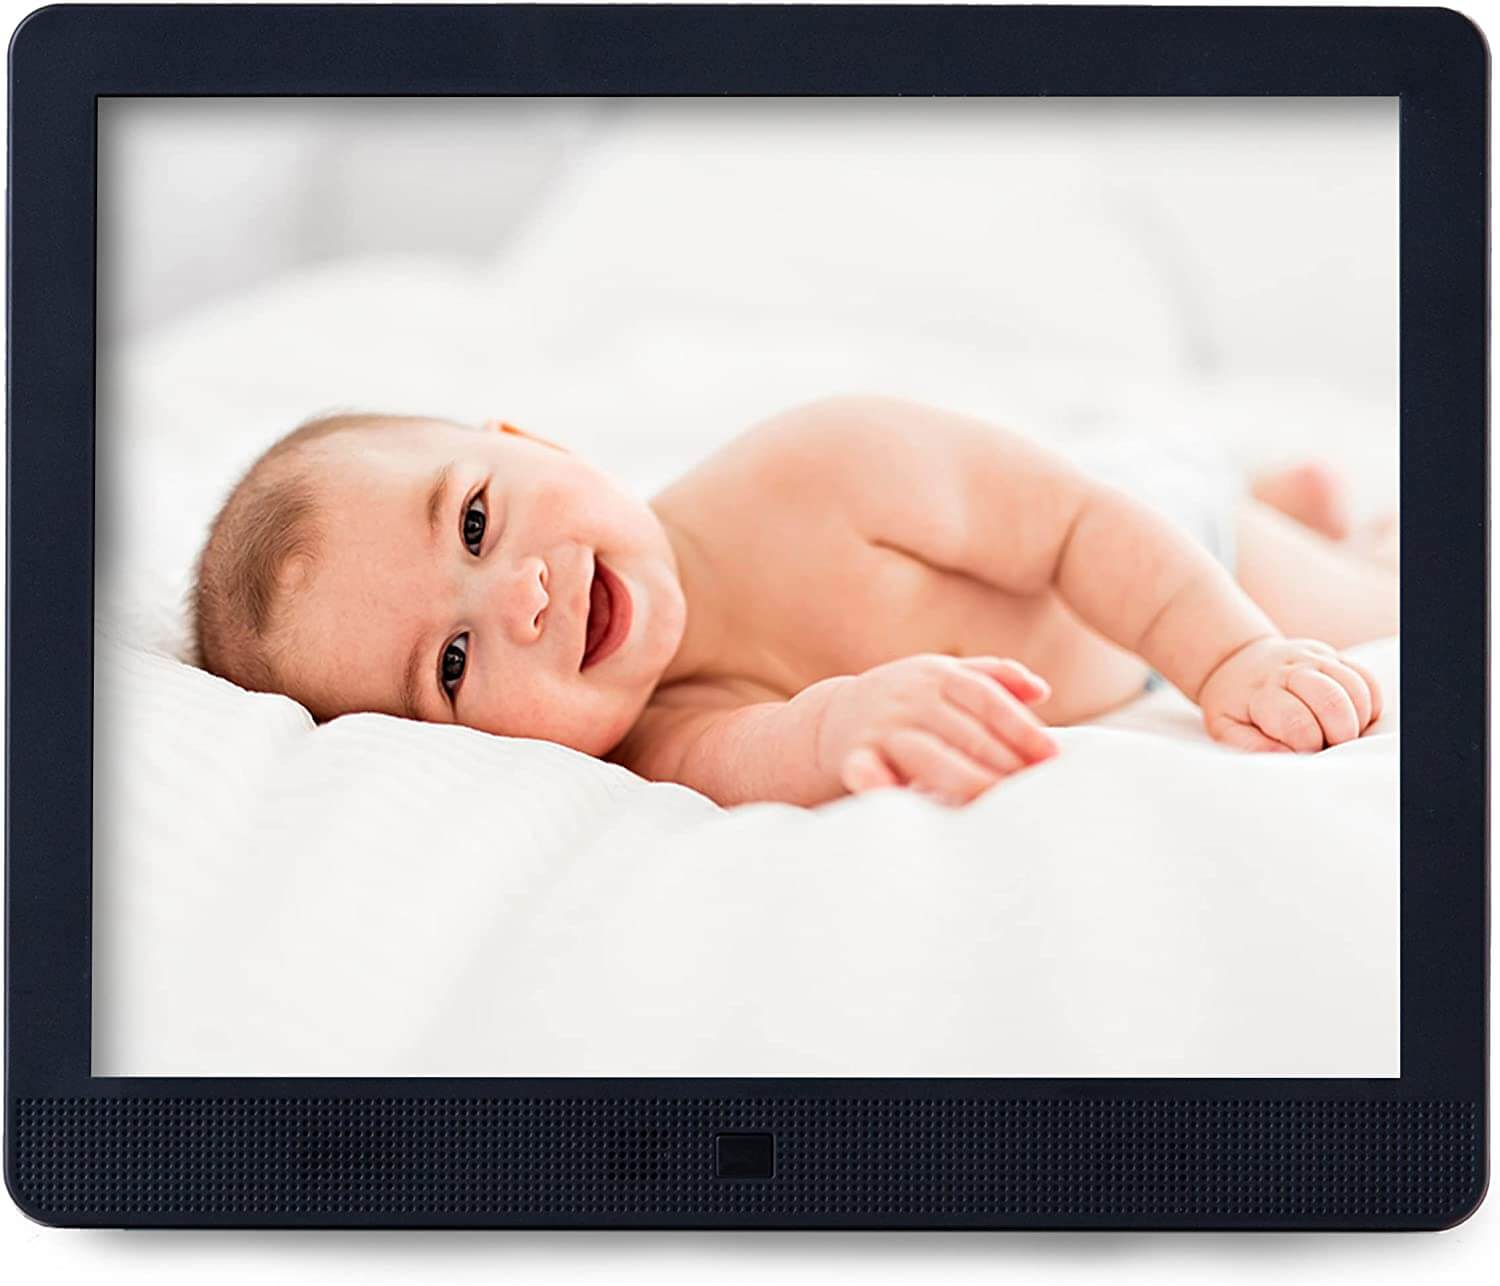 black digital picture frame showing a baby